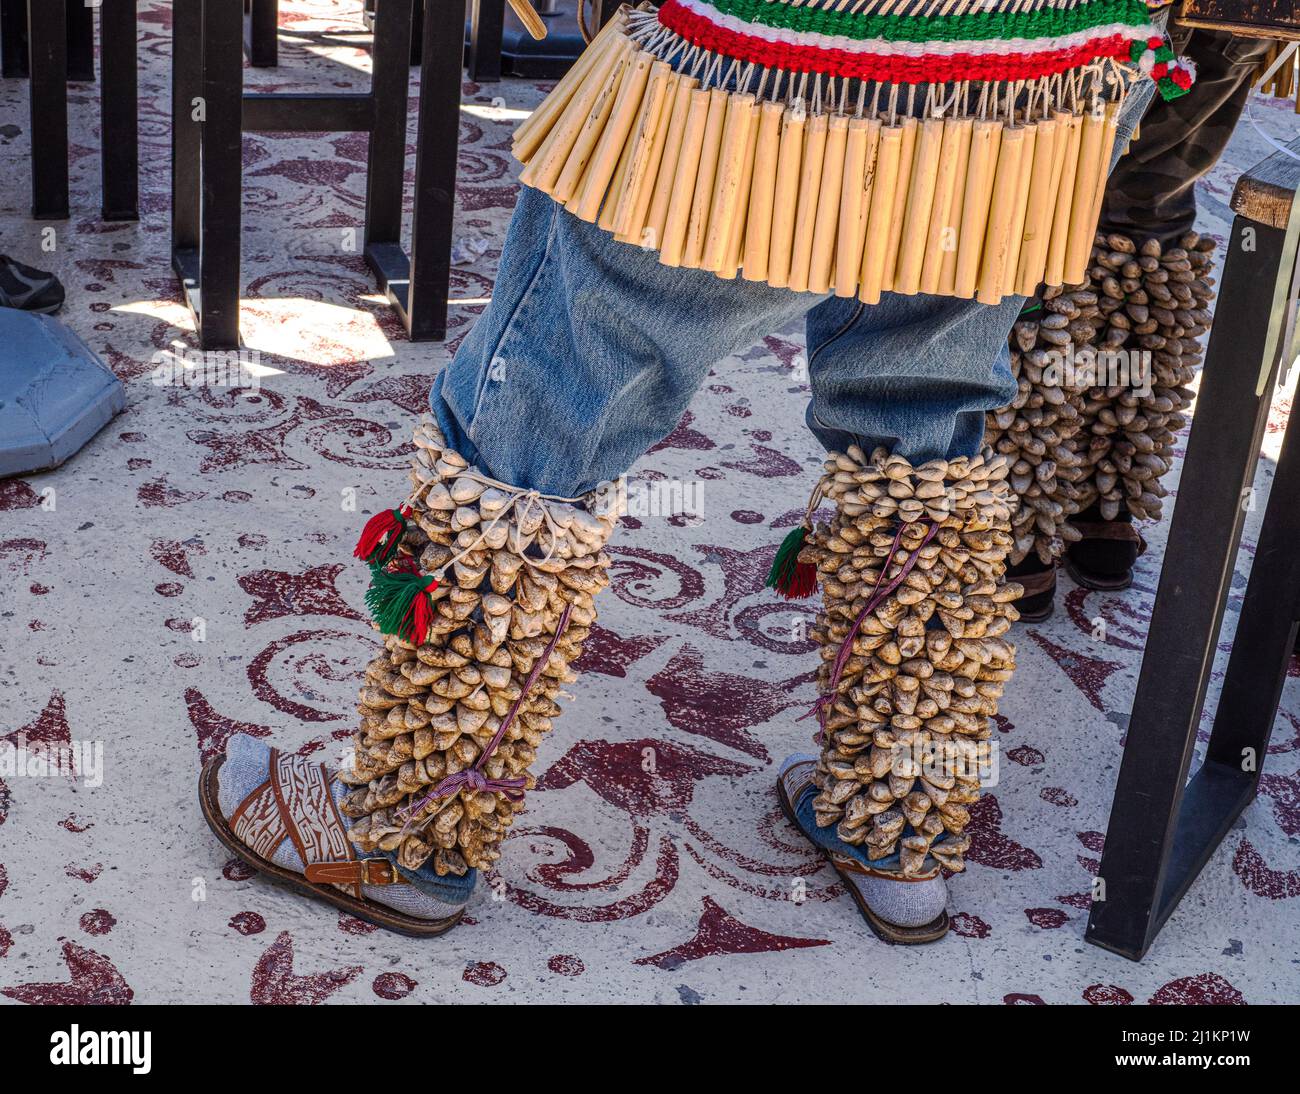 Fariseo dancers wearing hip rattles, cocoon rattles, blue jeans and sandals during 40 Days of Lent in San Carlos, Sonora, Mexico. Stock Photo